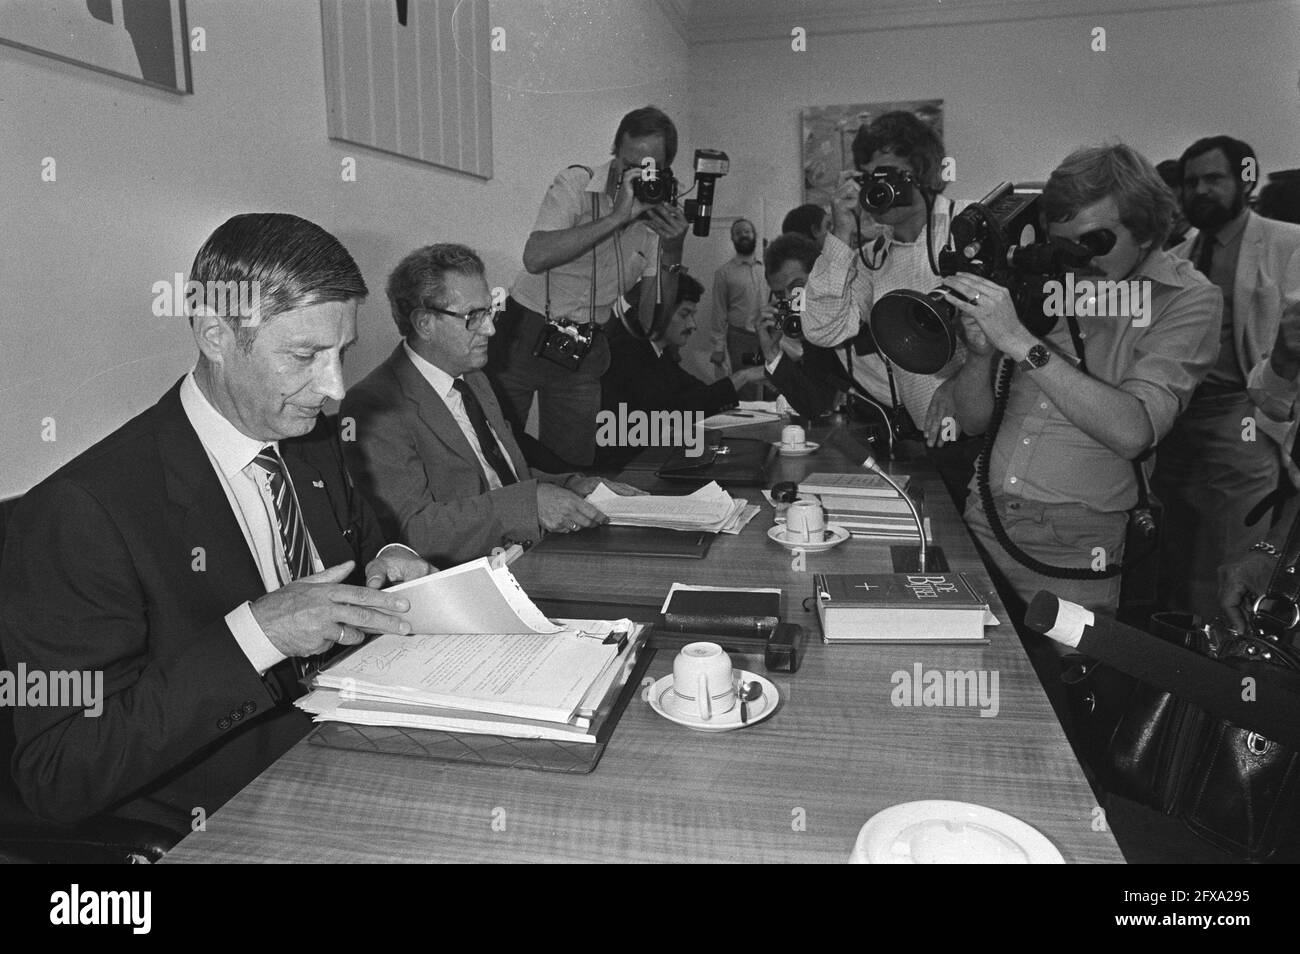 CDA fractional council cabinet information; 4a, 5a: Van Agt during meeting, 6a, 7a: many press with Van Agt (l) next to him Van Leijenhorst during meeting, July 28, 1981, Cabinet Information, The Netherlands, 20th century press agency photo, news to remember, documentary, historic photography 1945-1990, visual stories, human history of the Twentieth Century, capturing moments in time Stock Photo